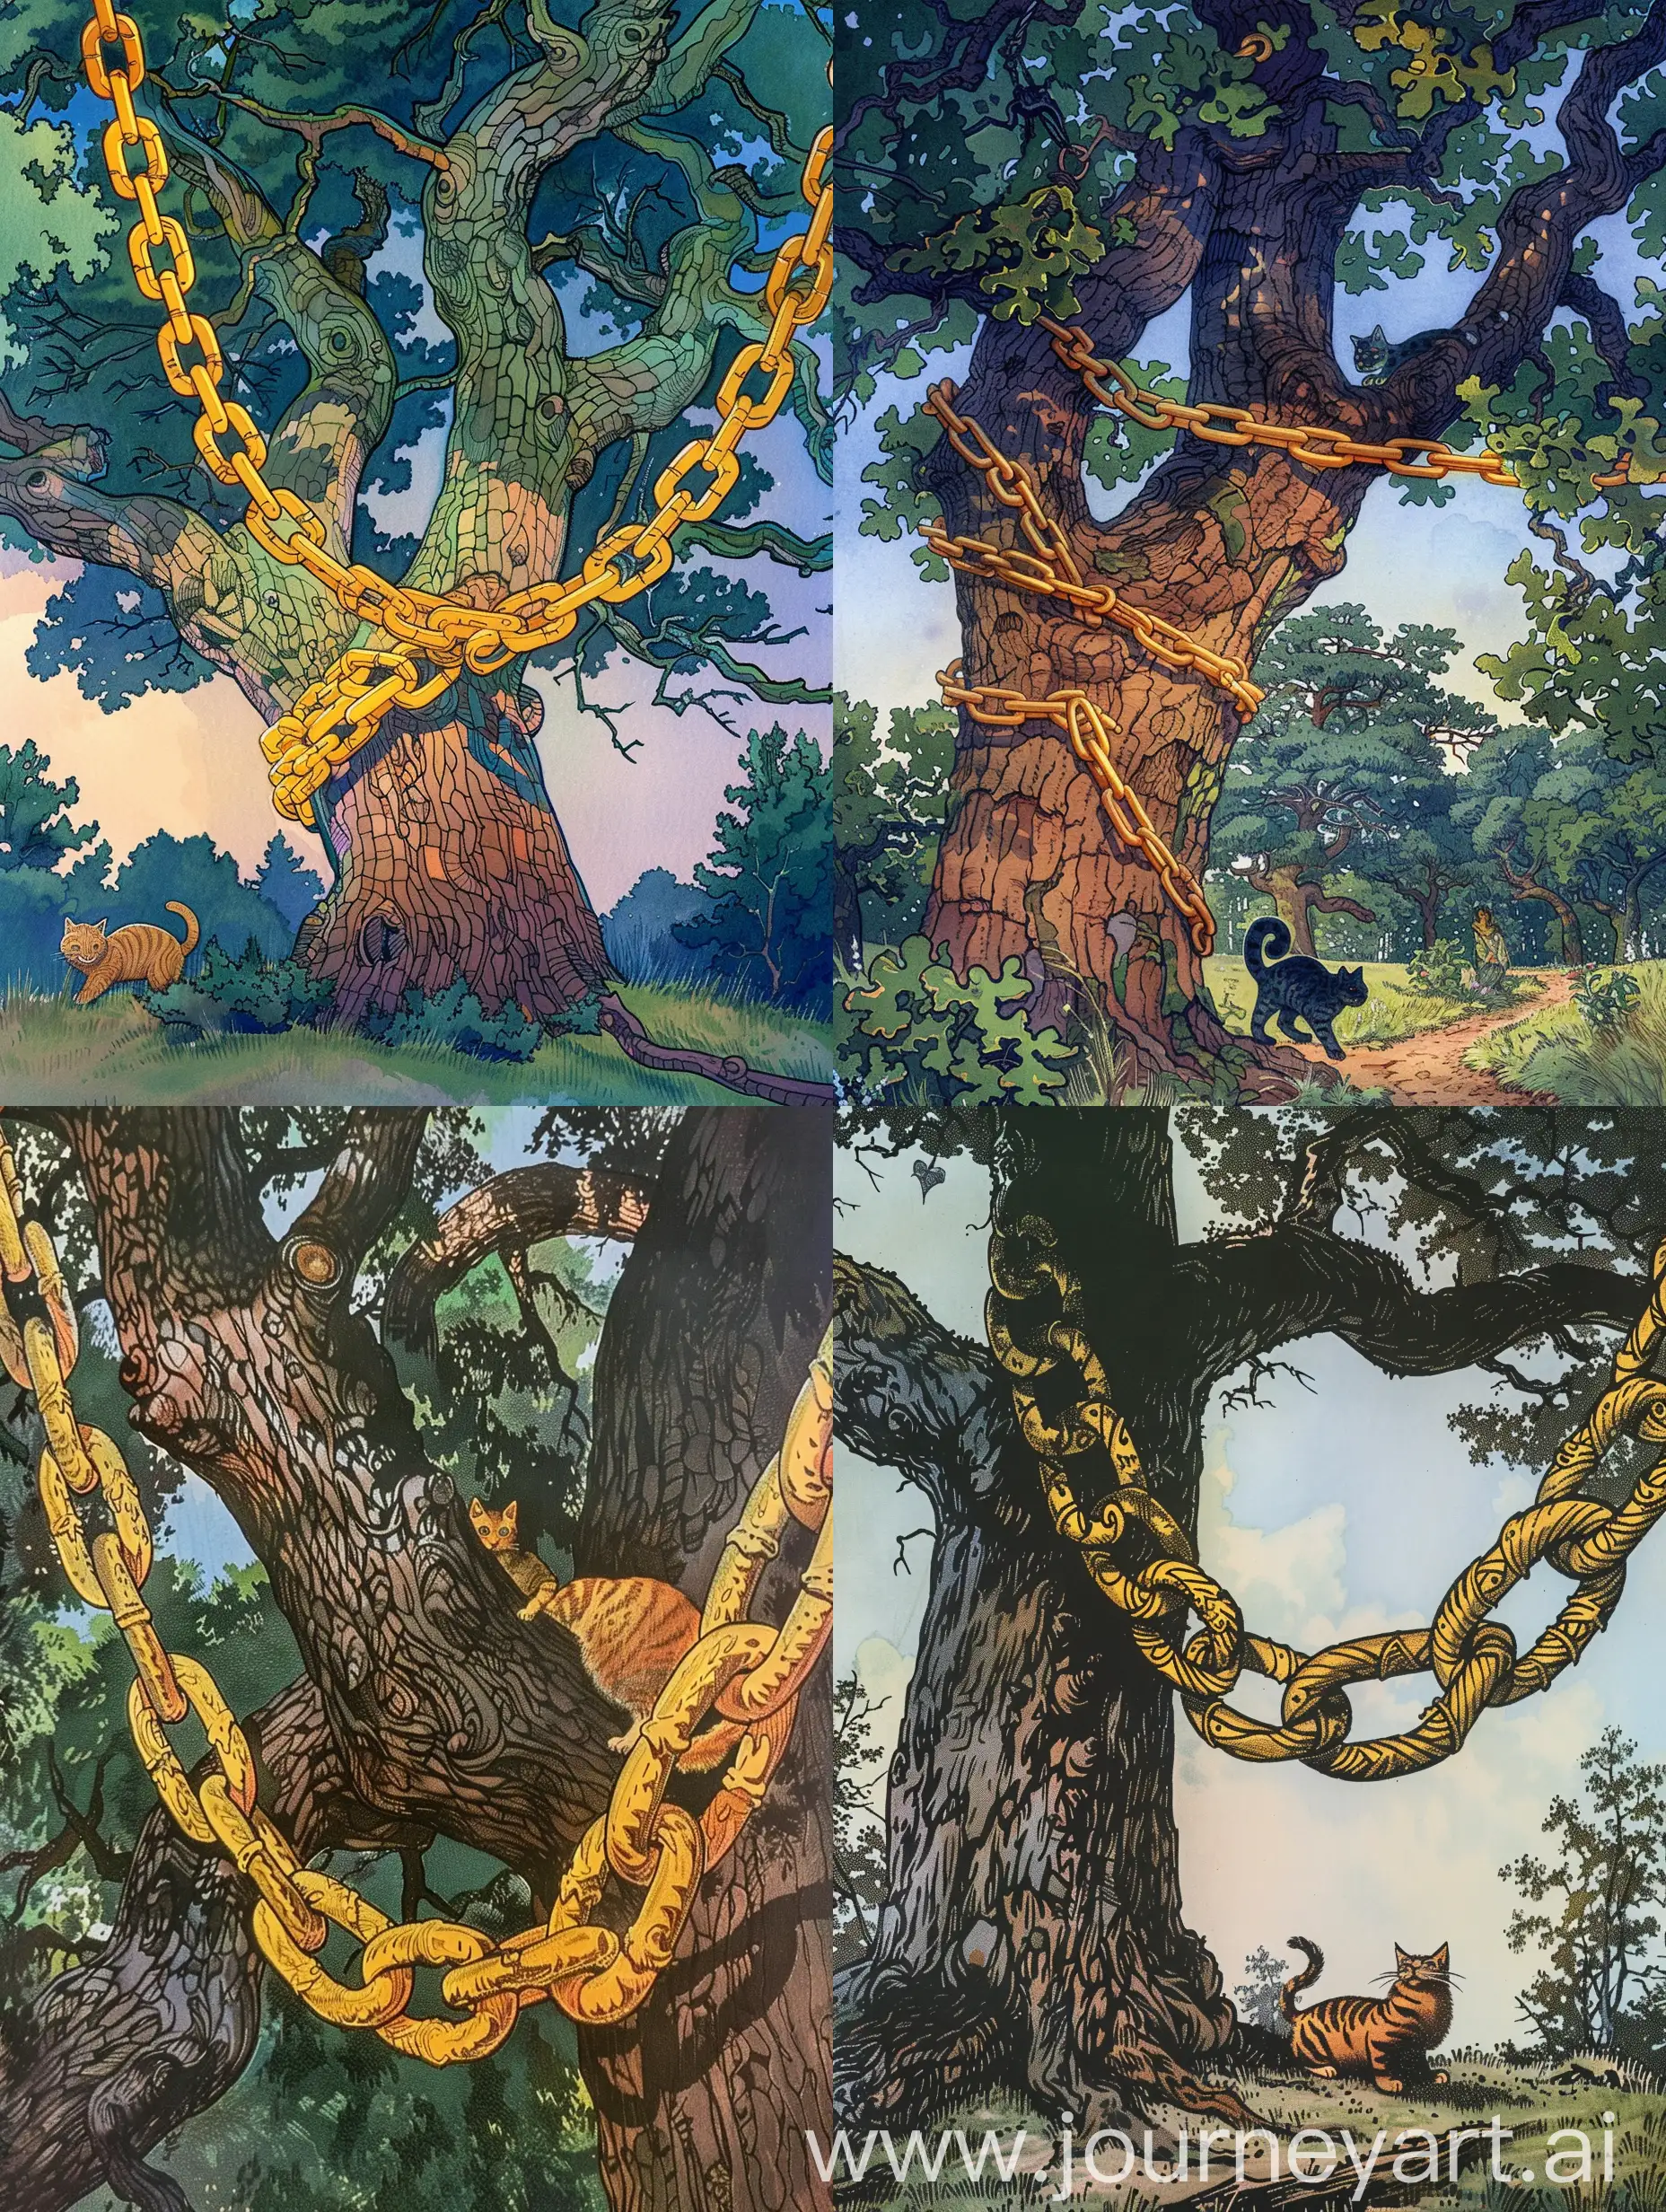 Golden-Chain-on-Oak-Tree-Day-and-Night-Cat-Scientist-in-Pushkins-Fairy-Tale-Setting